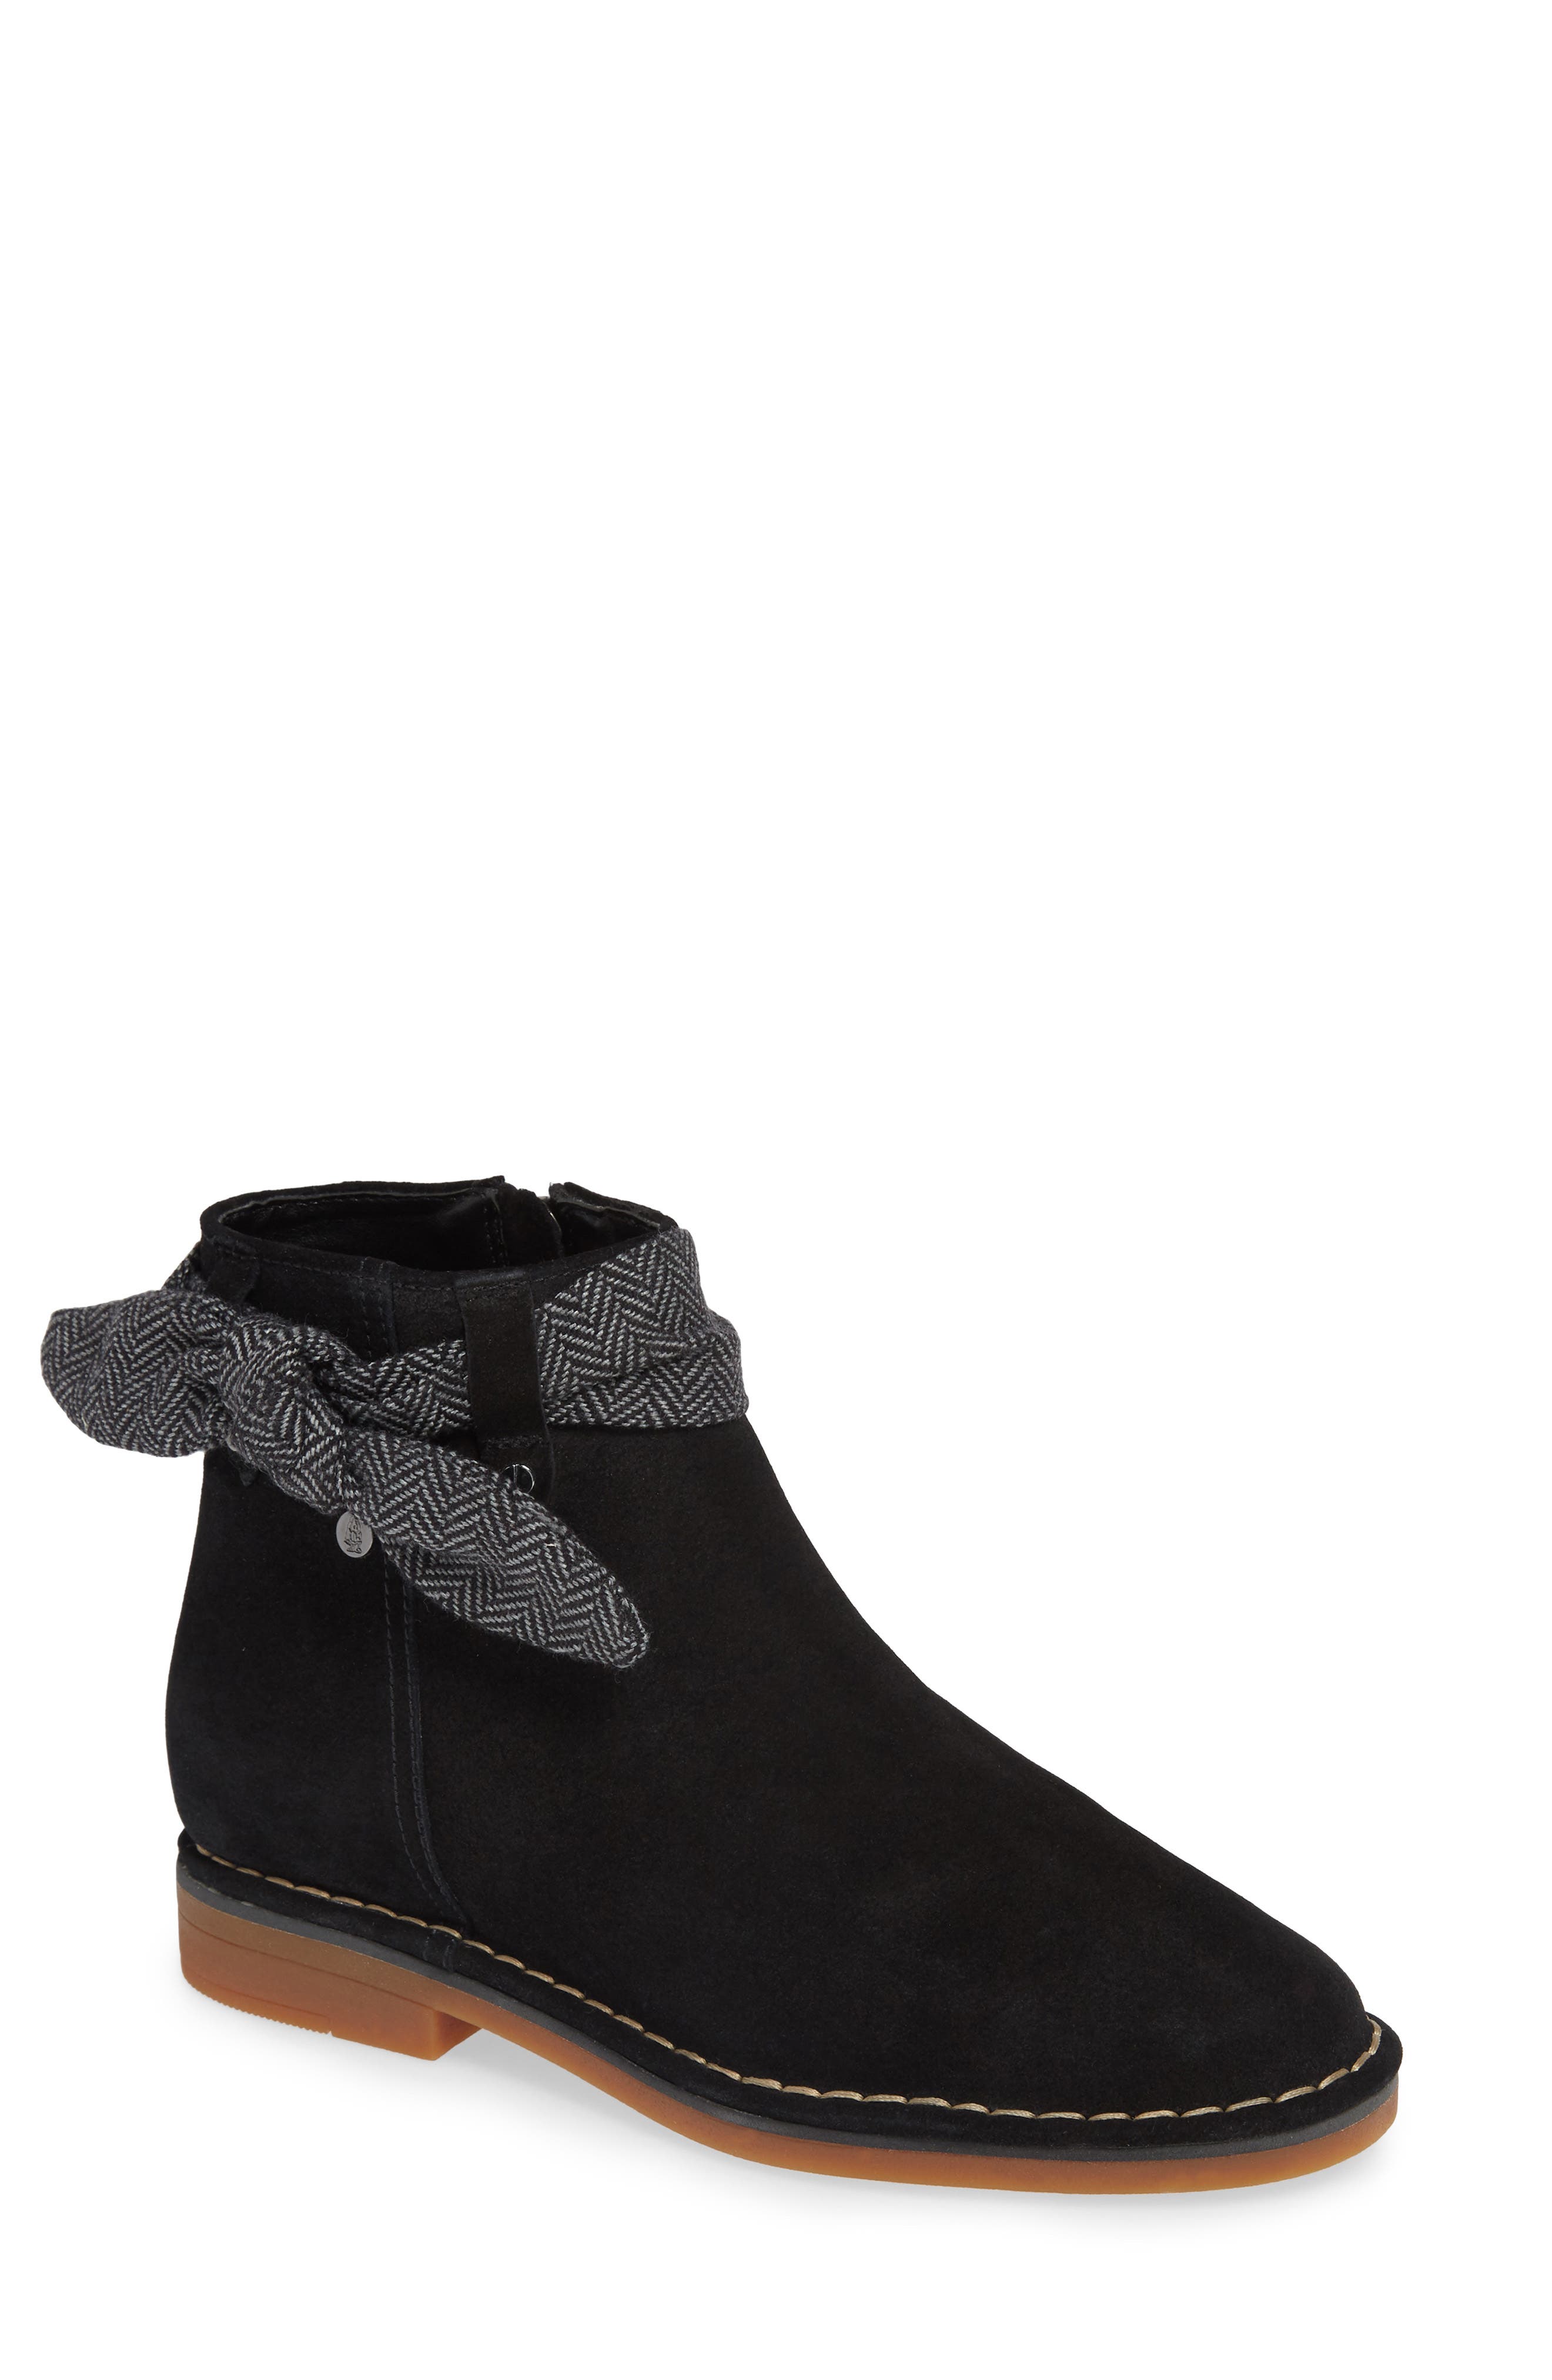 catelyn bow boot